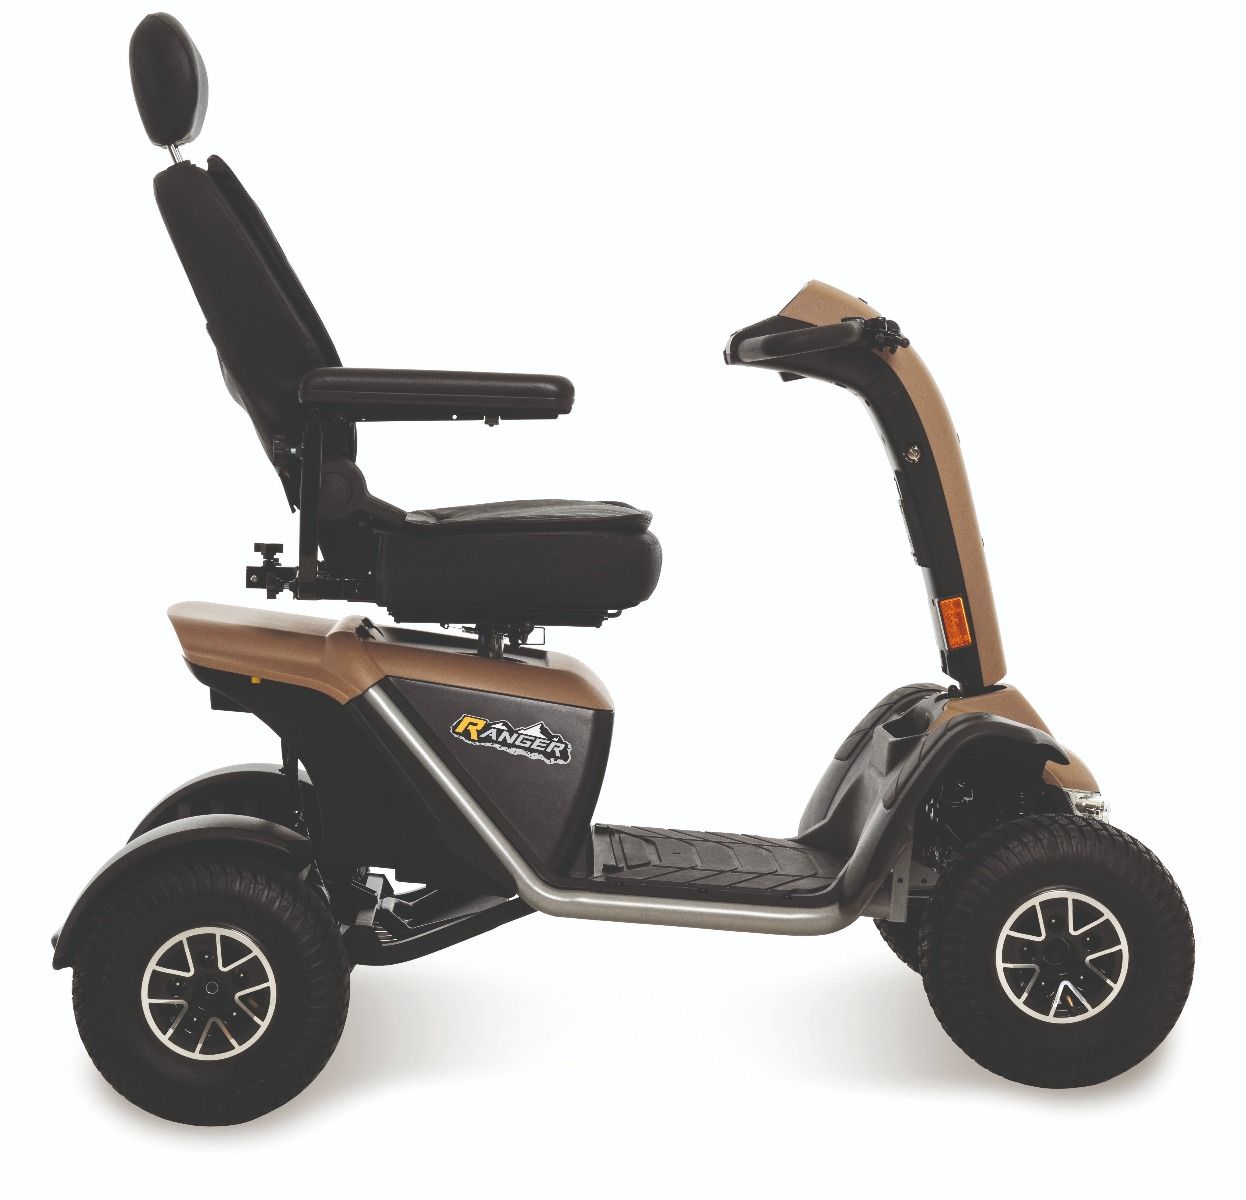 Ranger Off Road Mobility Scooter